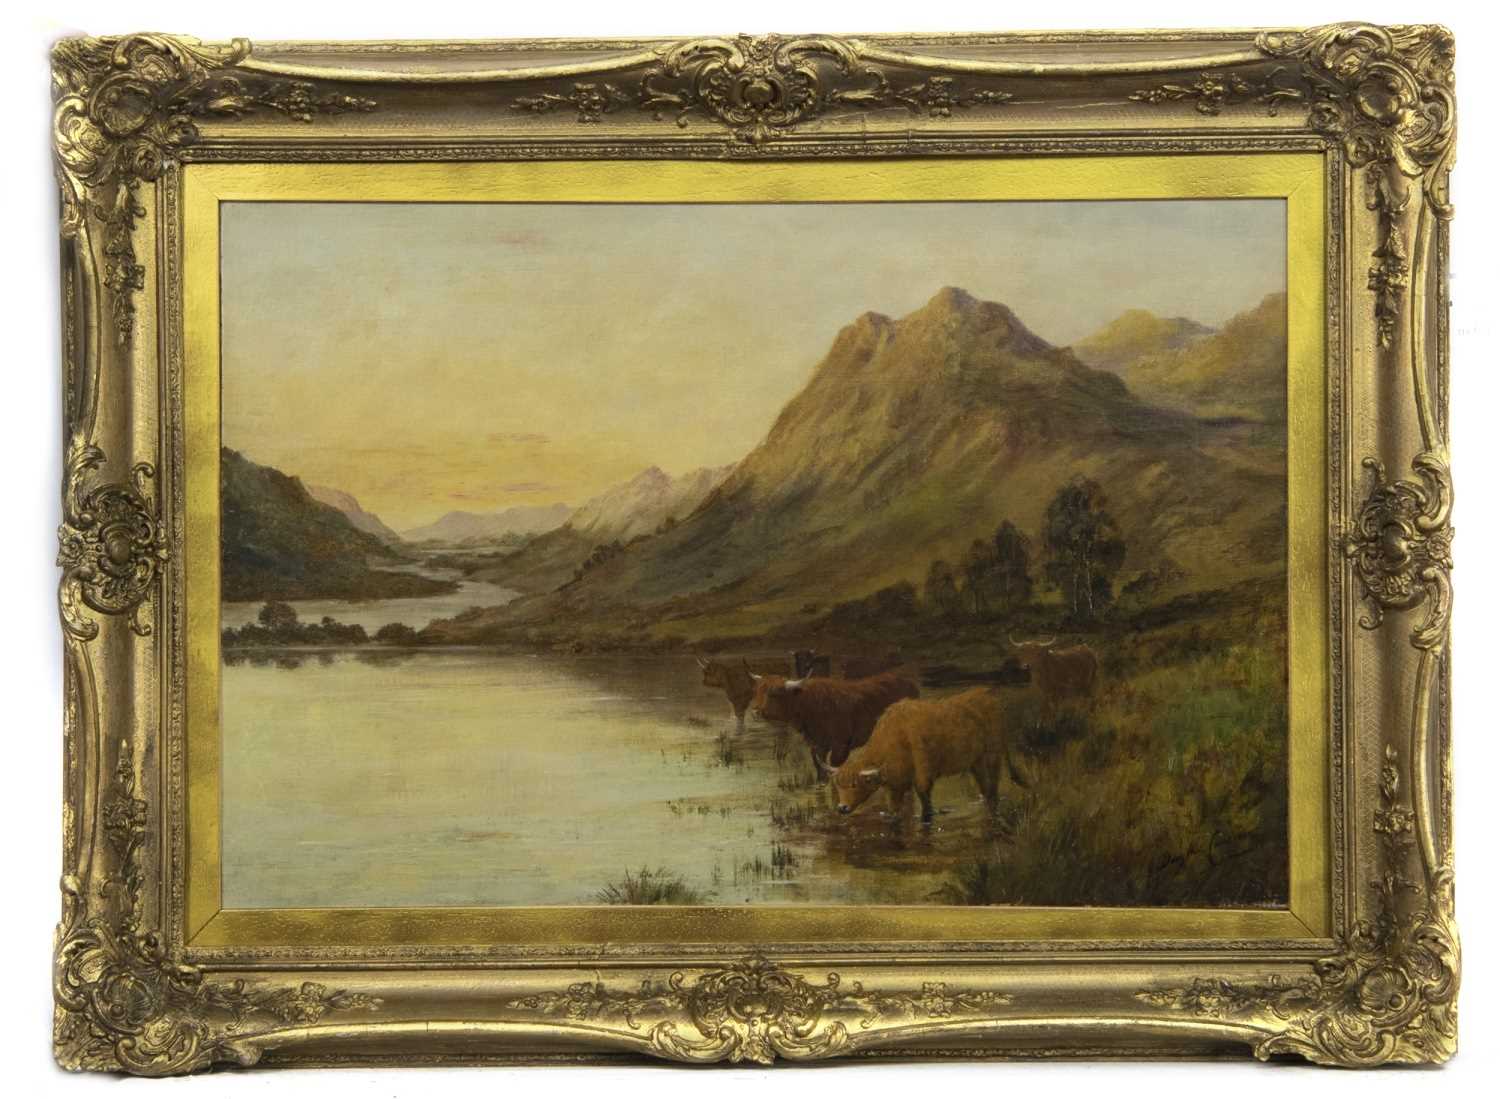 Lot 306 - HIGHLAND CATTLE IN A SCOTTISH LANDSCAPE, AN OIL BY DOUGLAS CAMERON